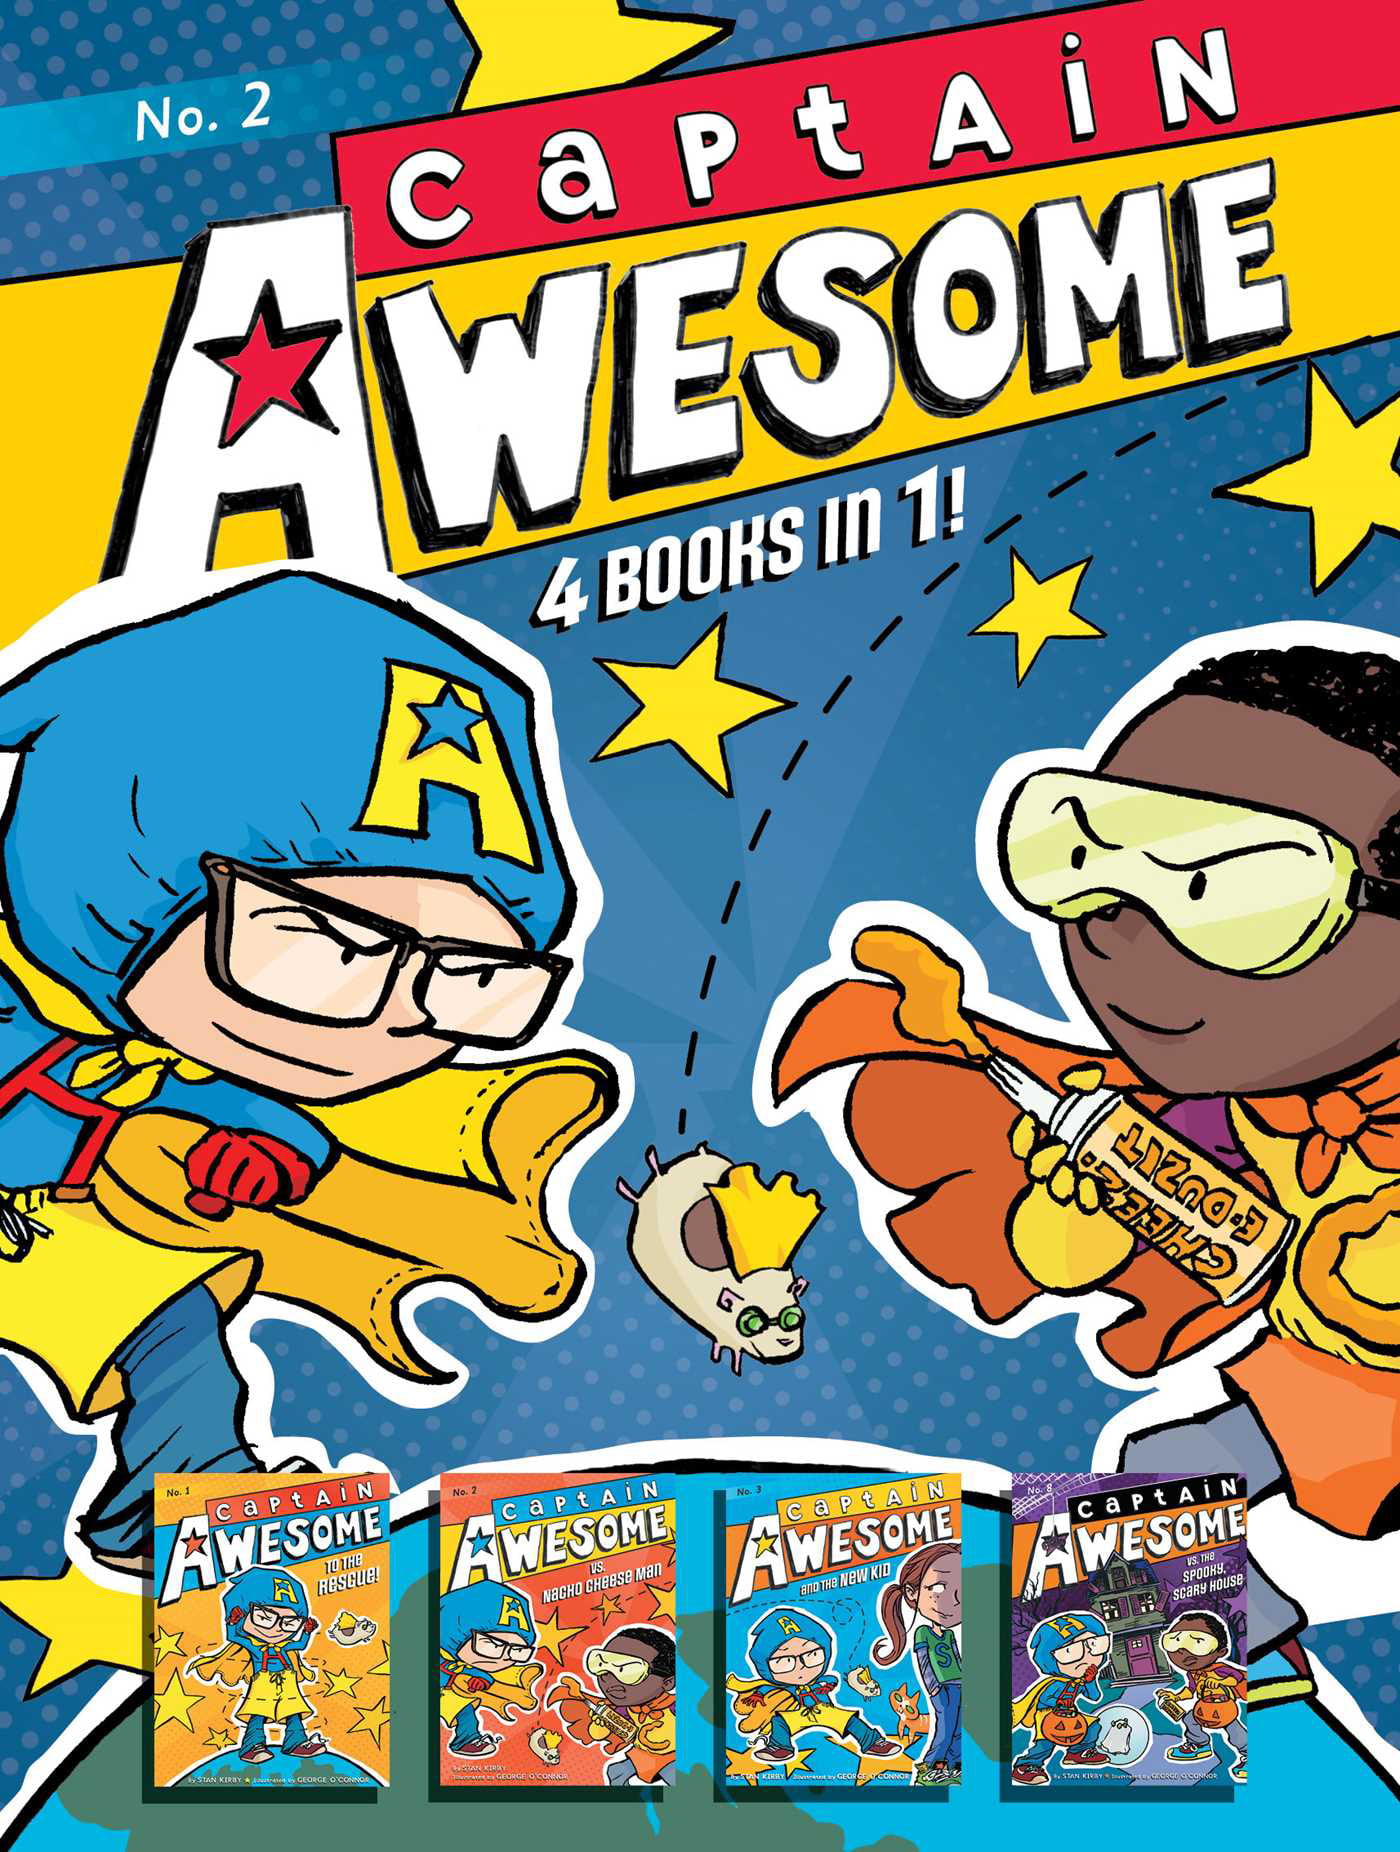 Captain Awesome: Captain Awesome 4 Books in 1! No. 2 : Captain 